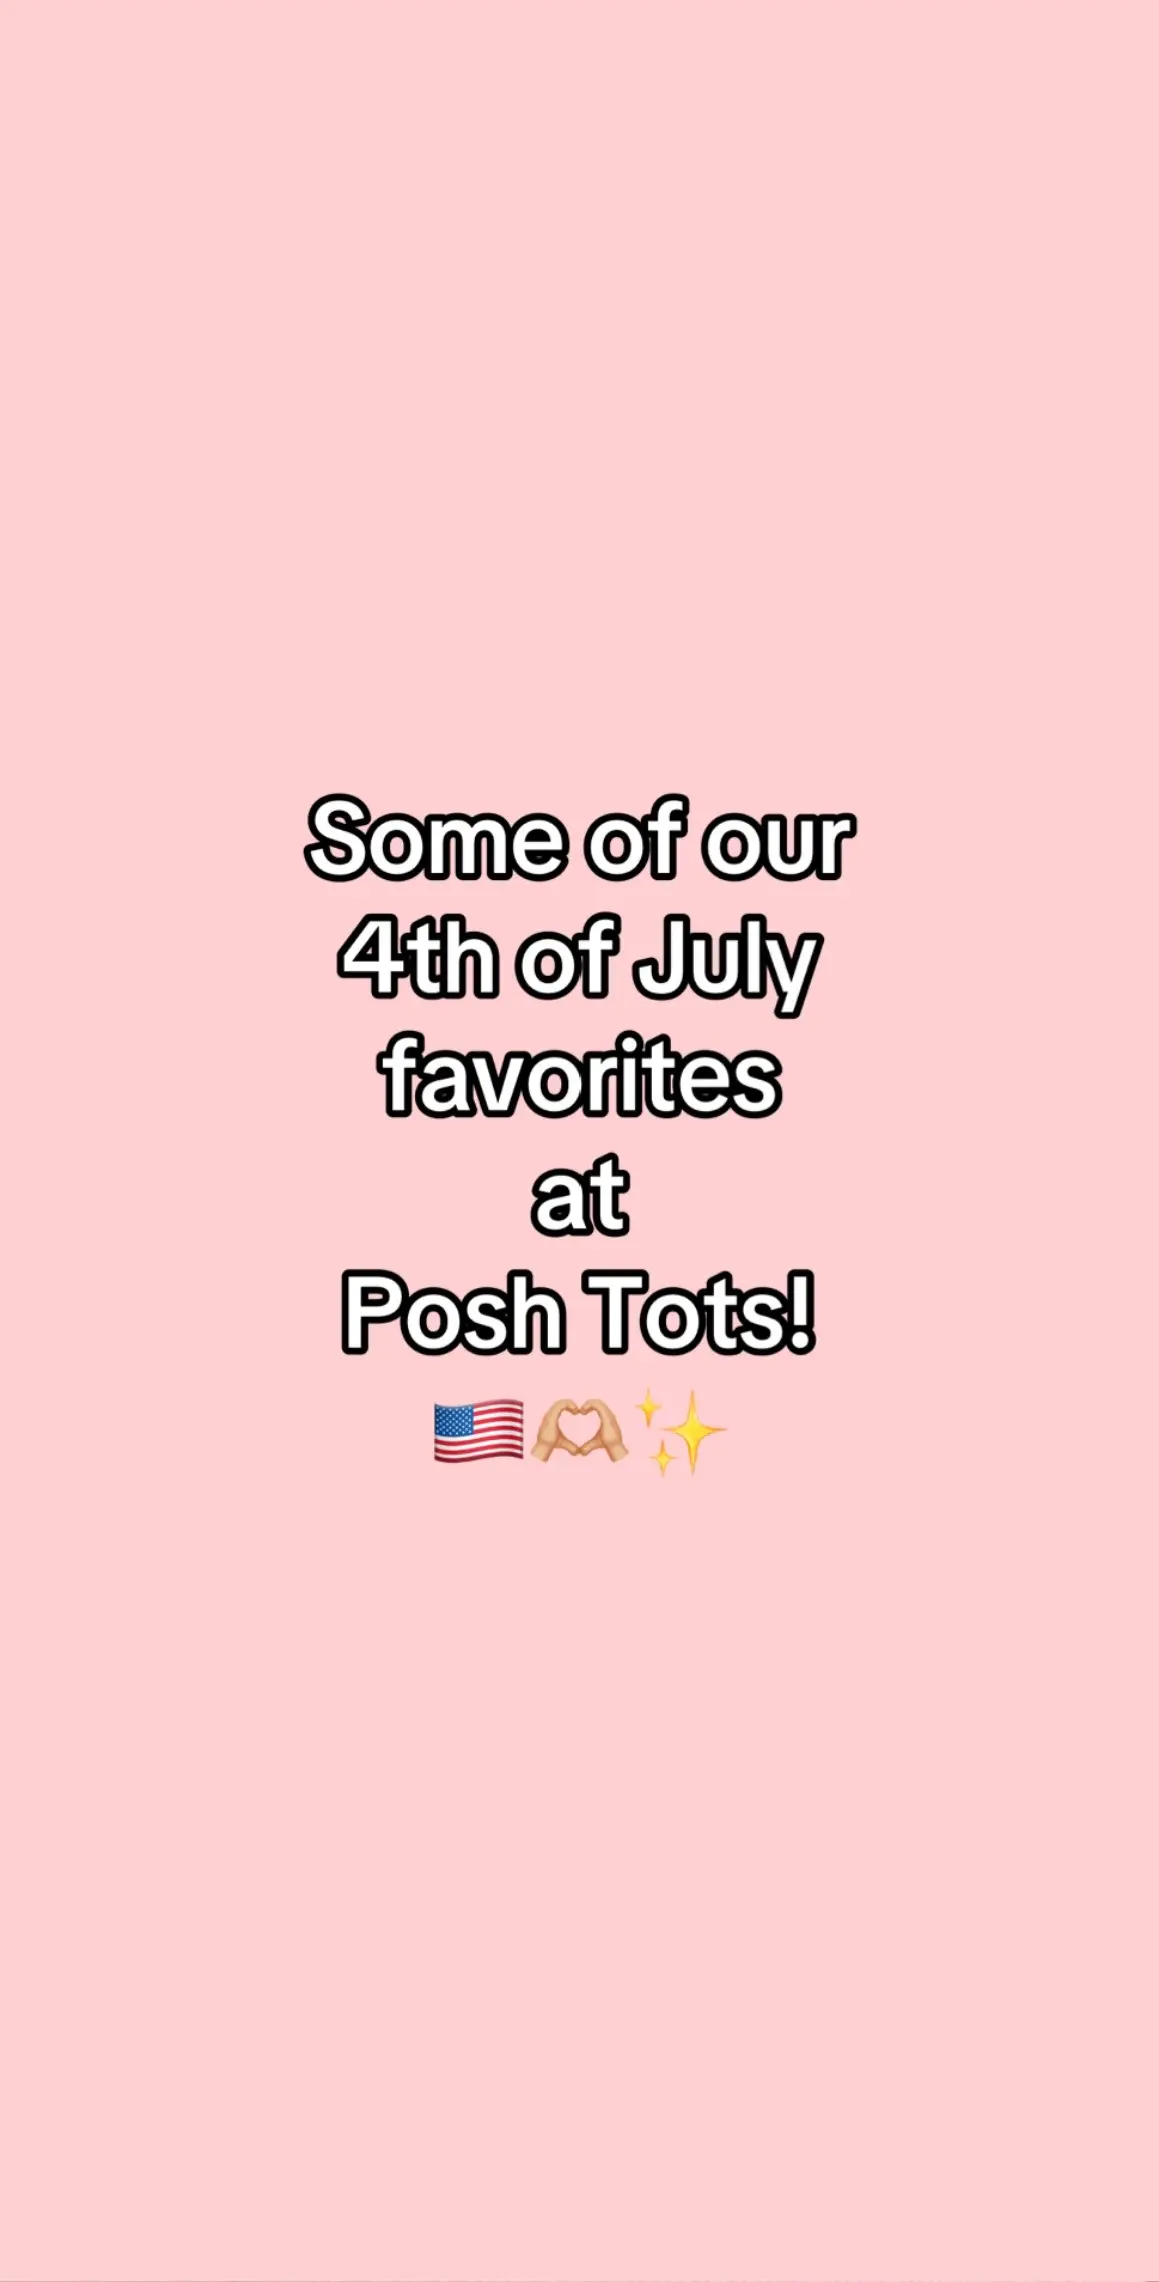 Come shop out 4th of July items!! 🇺🇸 #fyp #poshtots #childrensboutique #augustaga #4thofjuly 